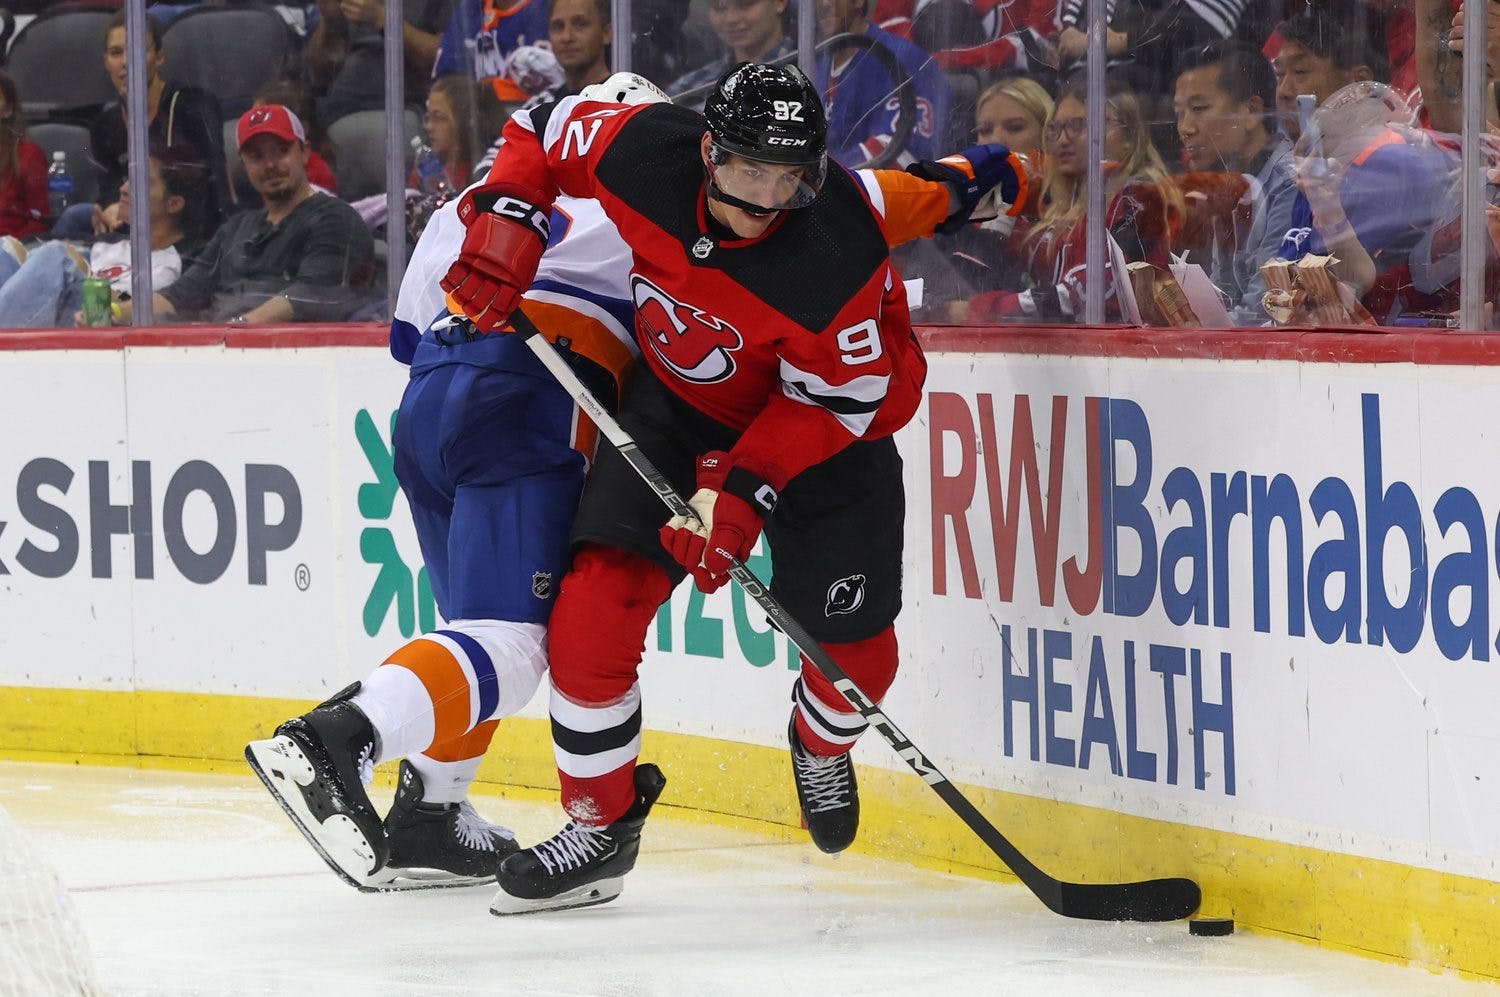 New Jersey Devils’ Tomas Nosek day-to-day with lower-body injury